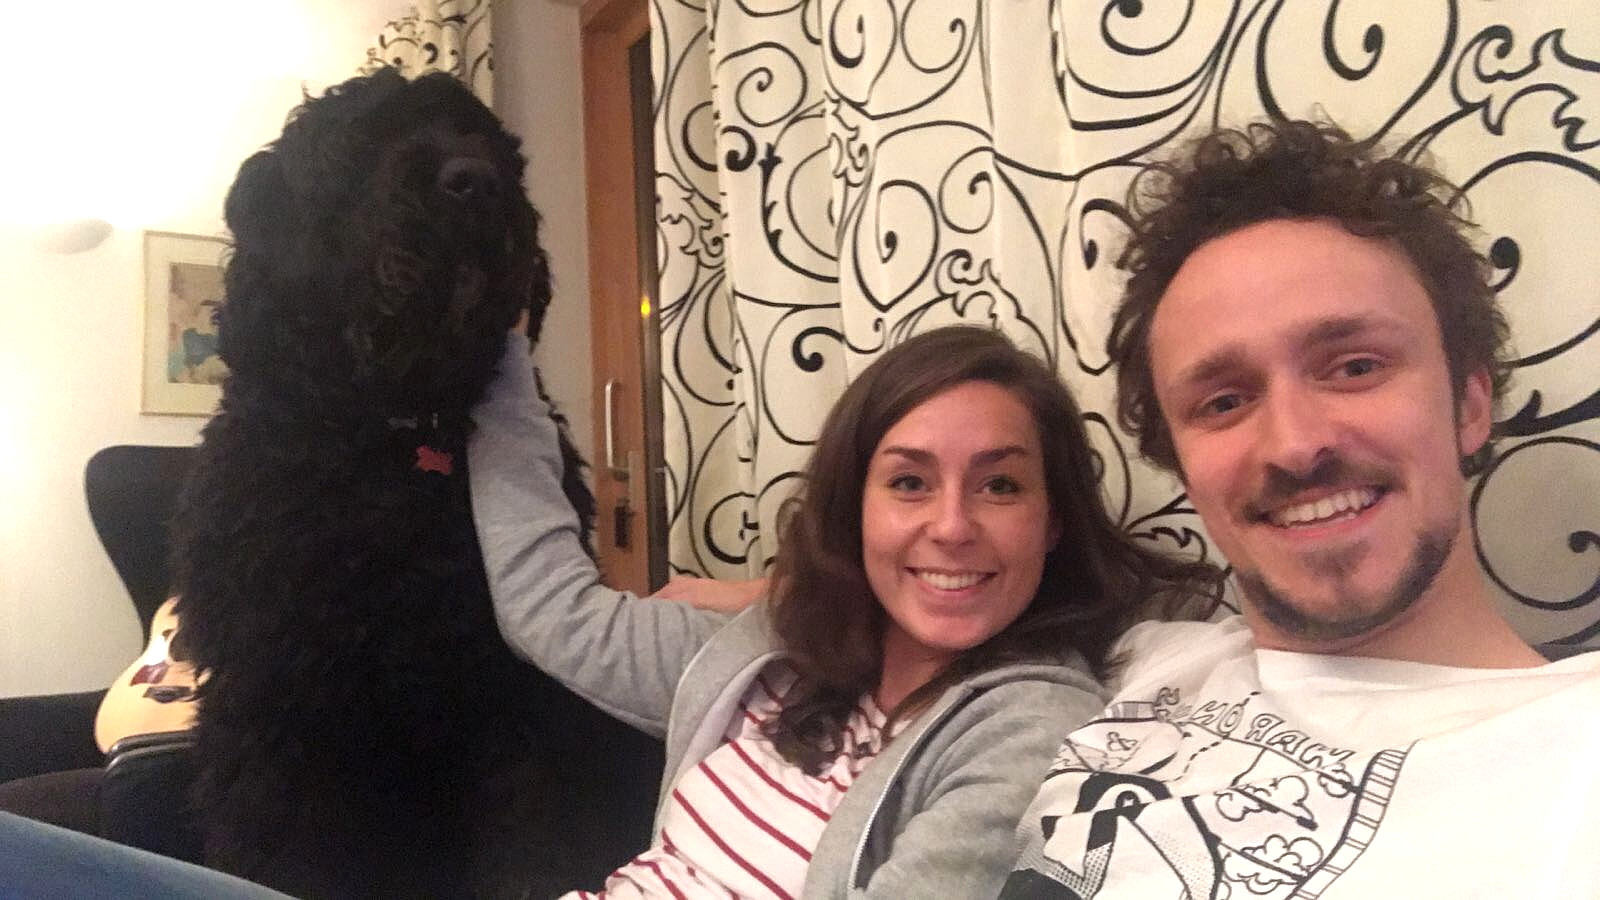 Tom with girlfriend Laura and dog Vlad